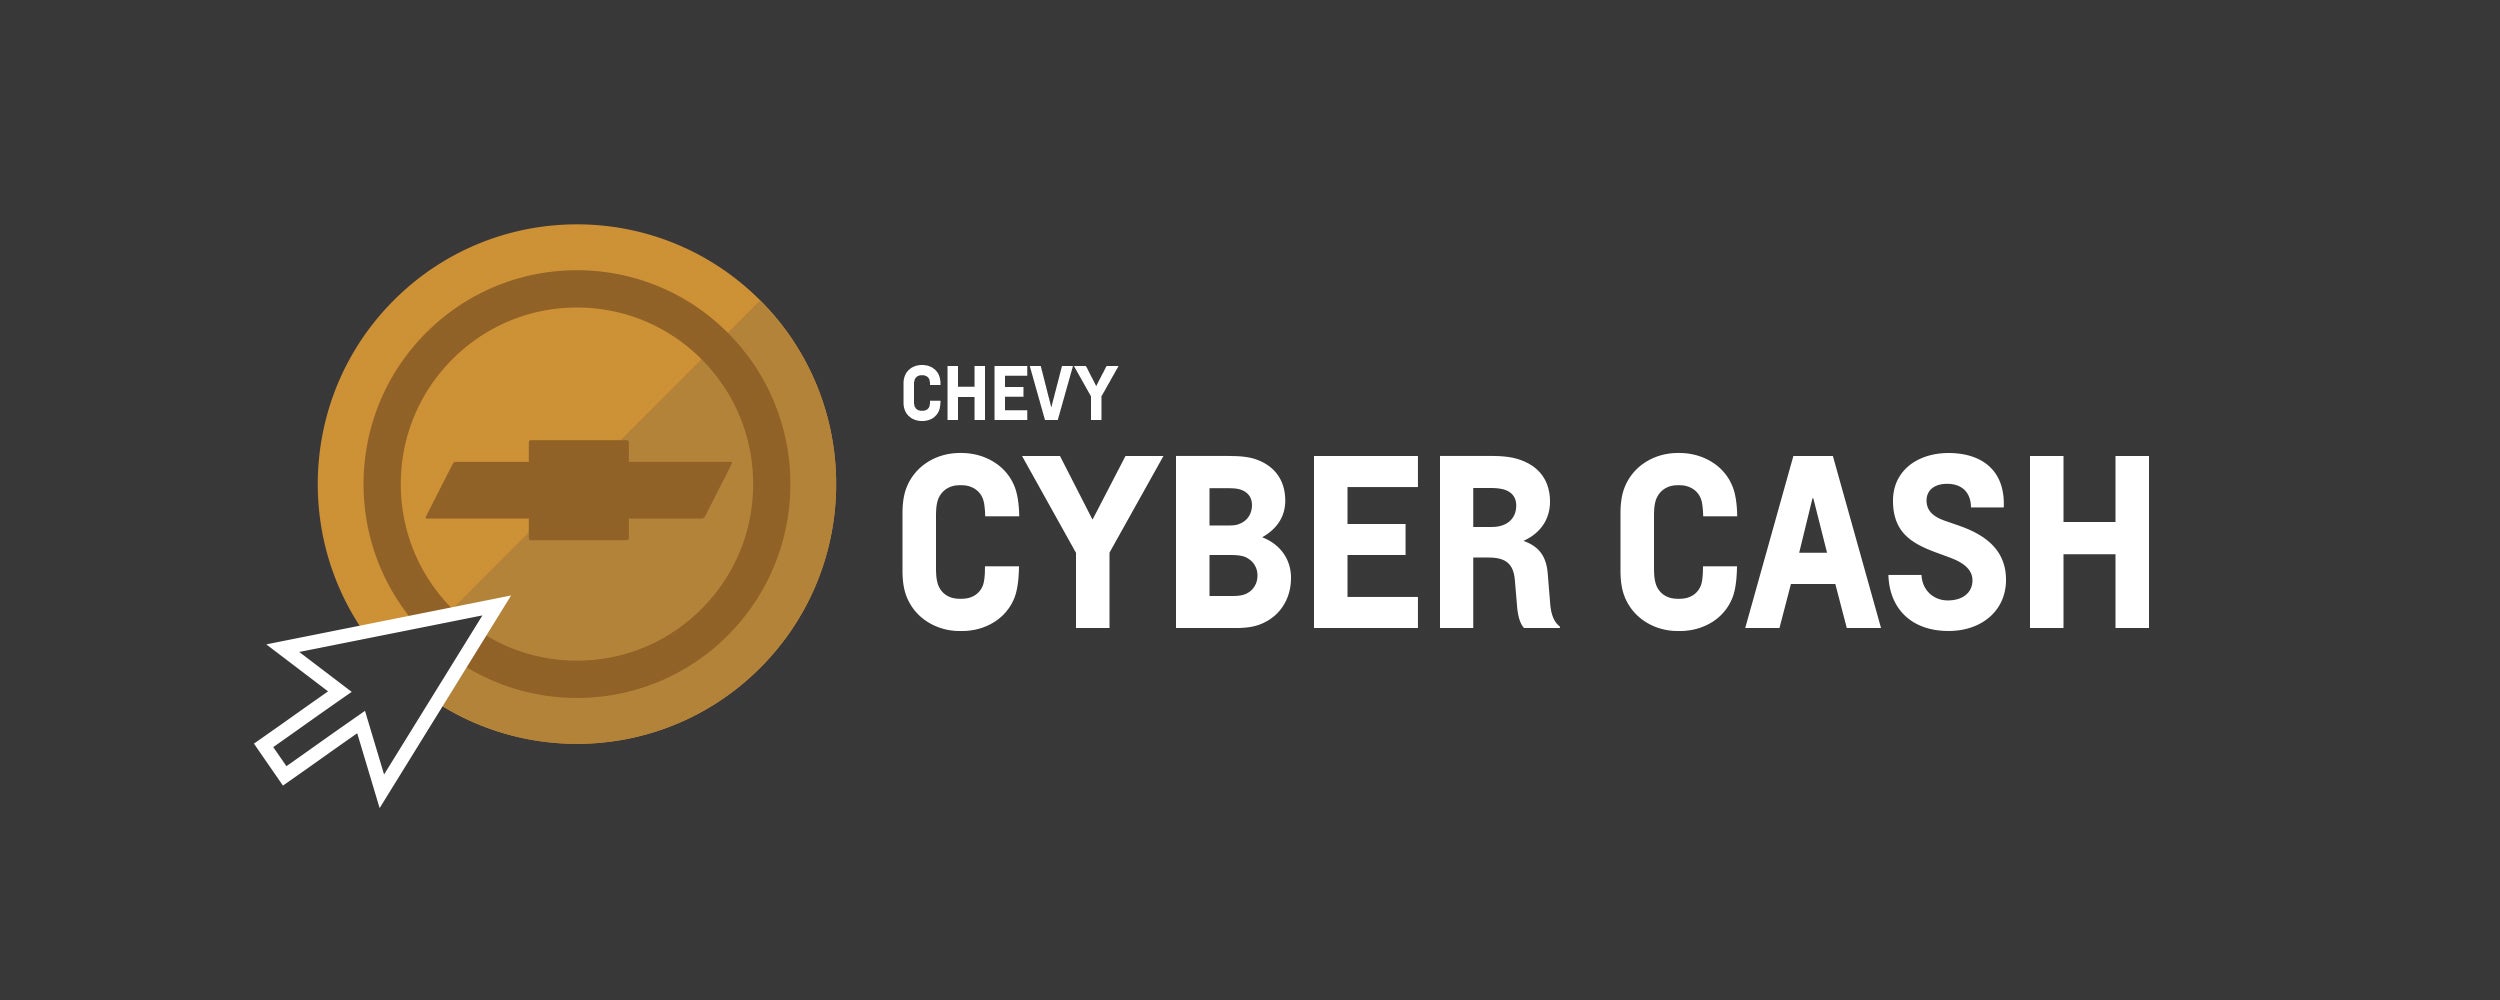 Chevy Cyber Cash Event Lipscomb Chevrolet Buick GMC in Bowie TX